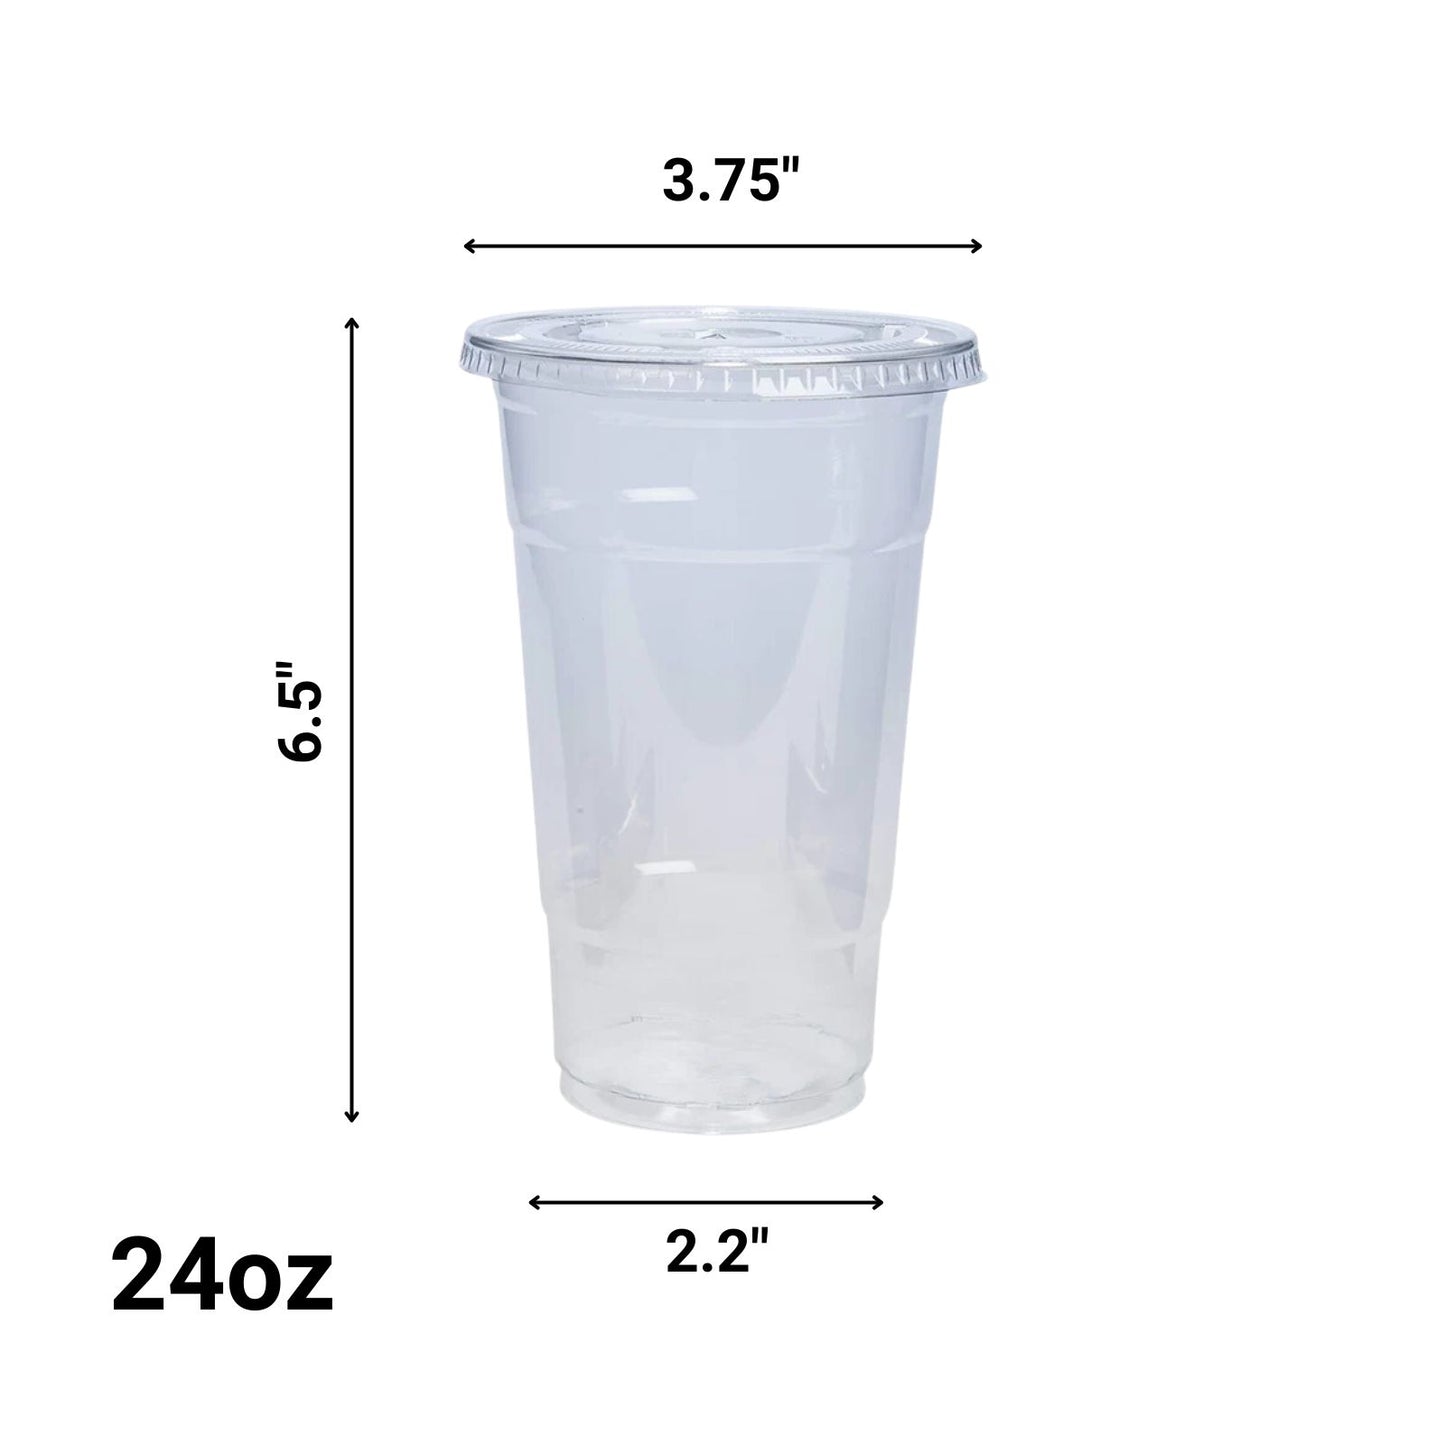 24oz Plastic Clear PET Cups With Flat Lid & Straw, for All Kinds of Beverages